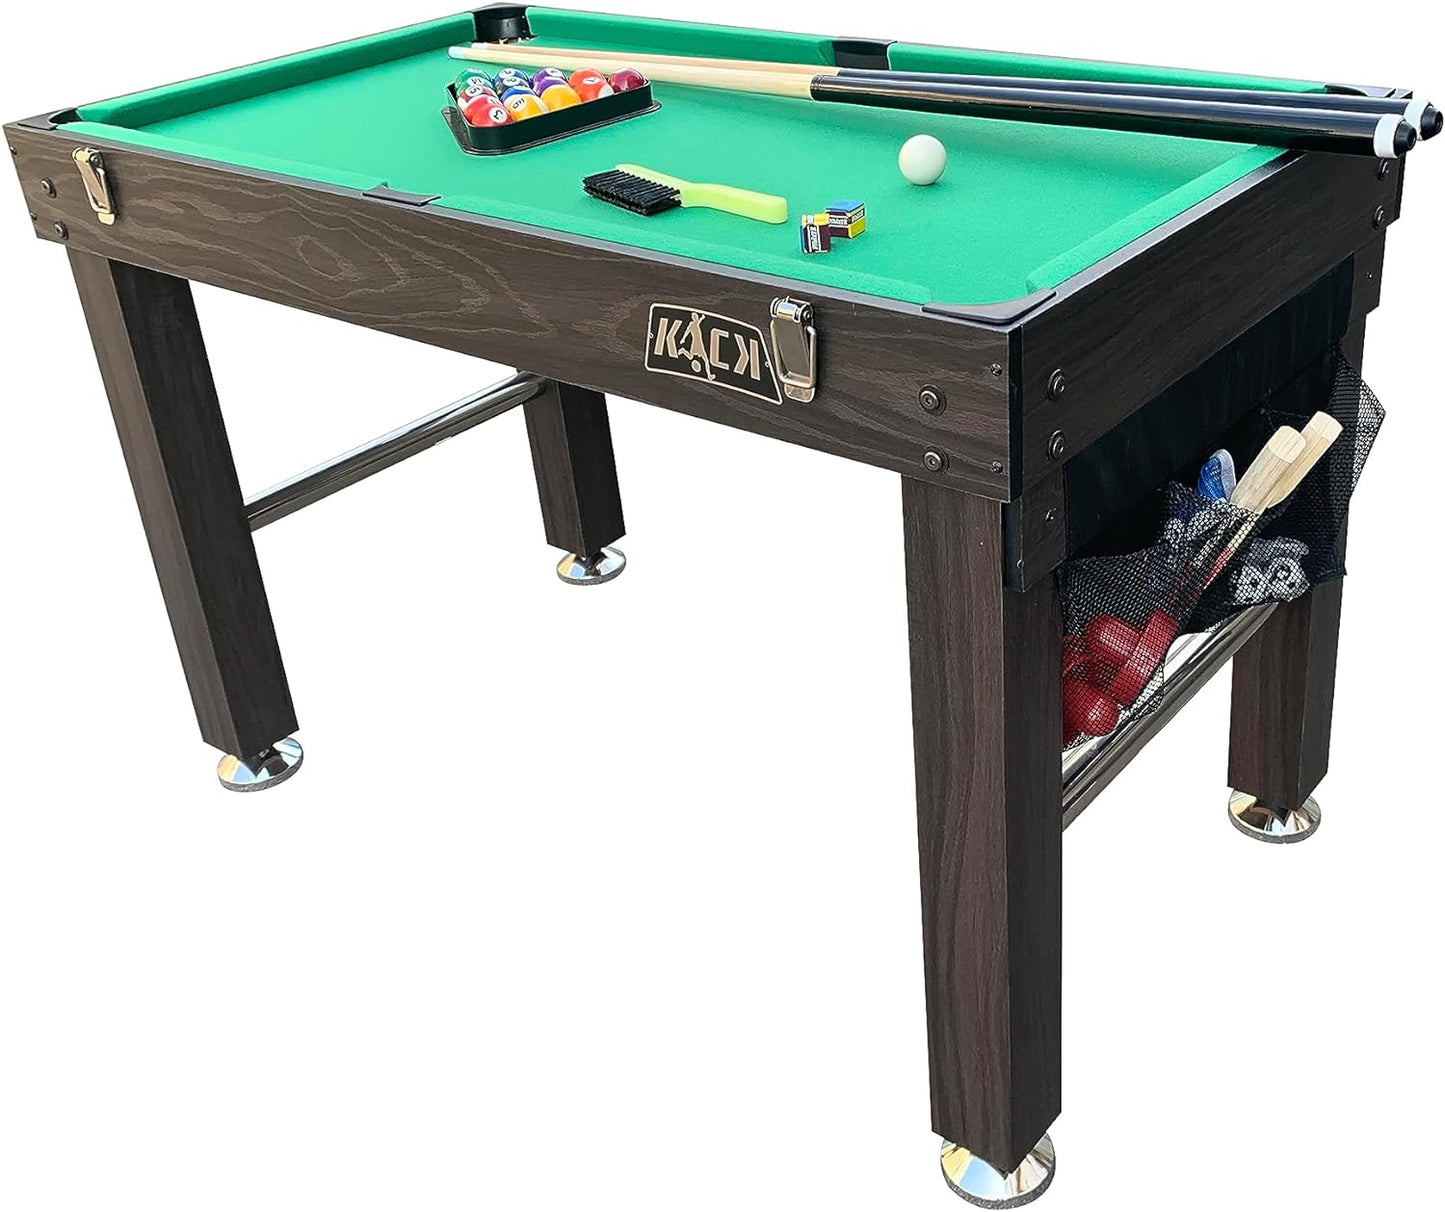 Minotaur 48" 5-In-1 Multi-Game Table - Combo Game Table Set - Foosball, Glide Hockey, Billiards/Pool, Table Tennis, and Basketball for Home, Game Room, Friends and Family!